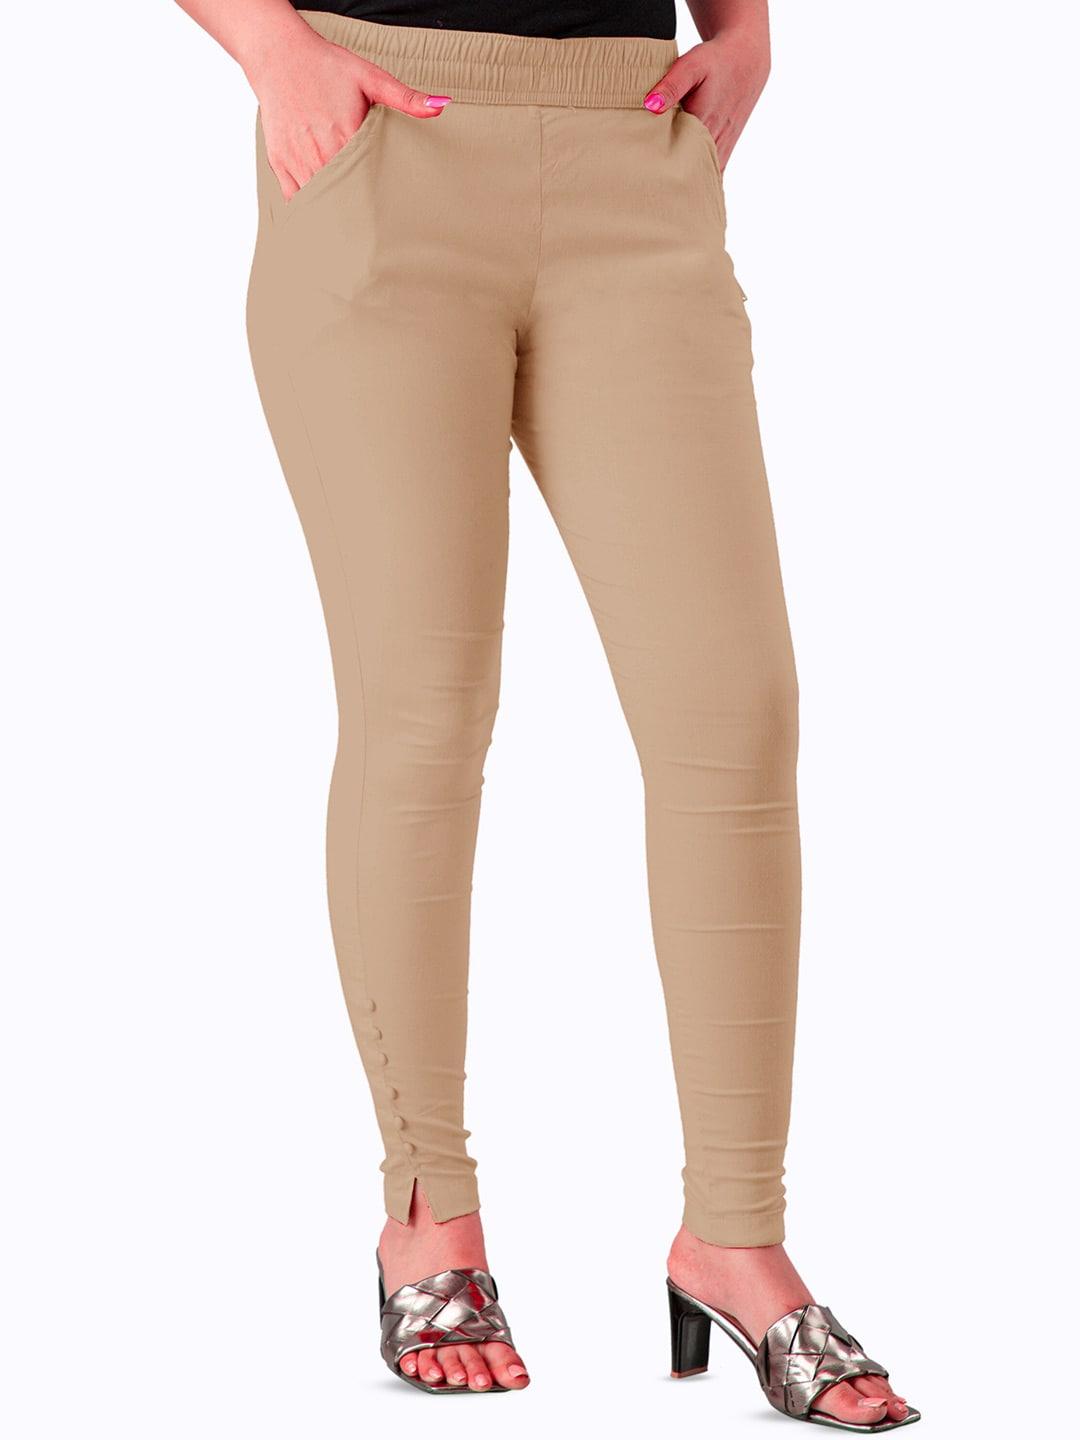 baesd-stretchable-slim-fit-jeggings